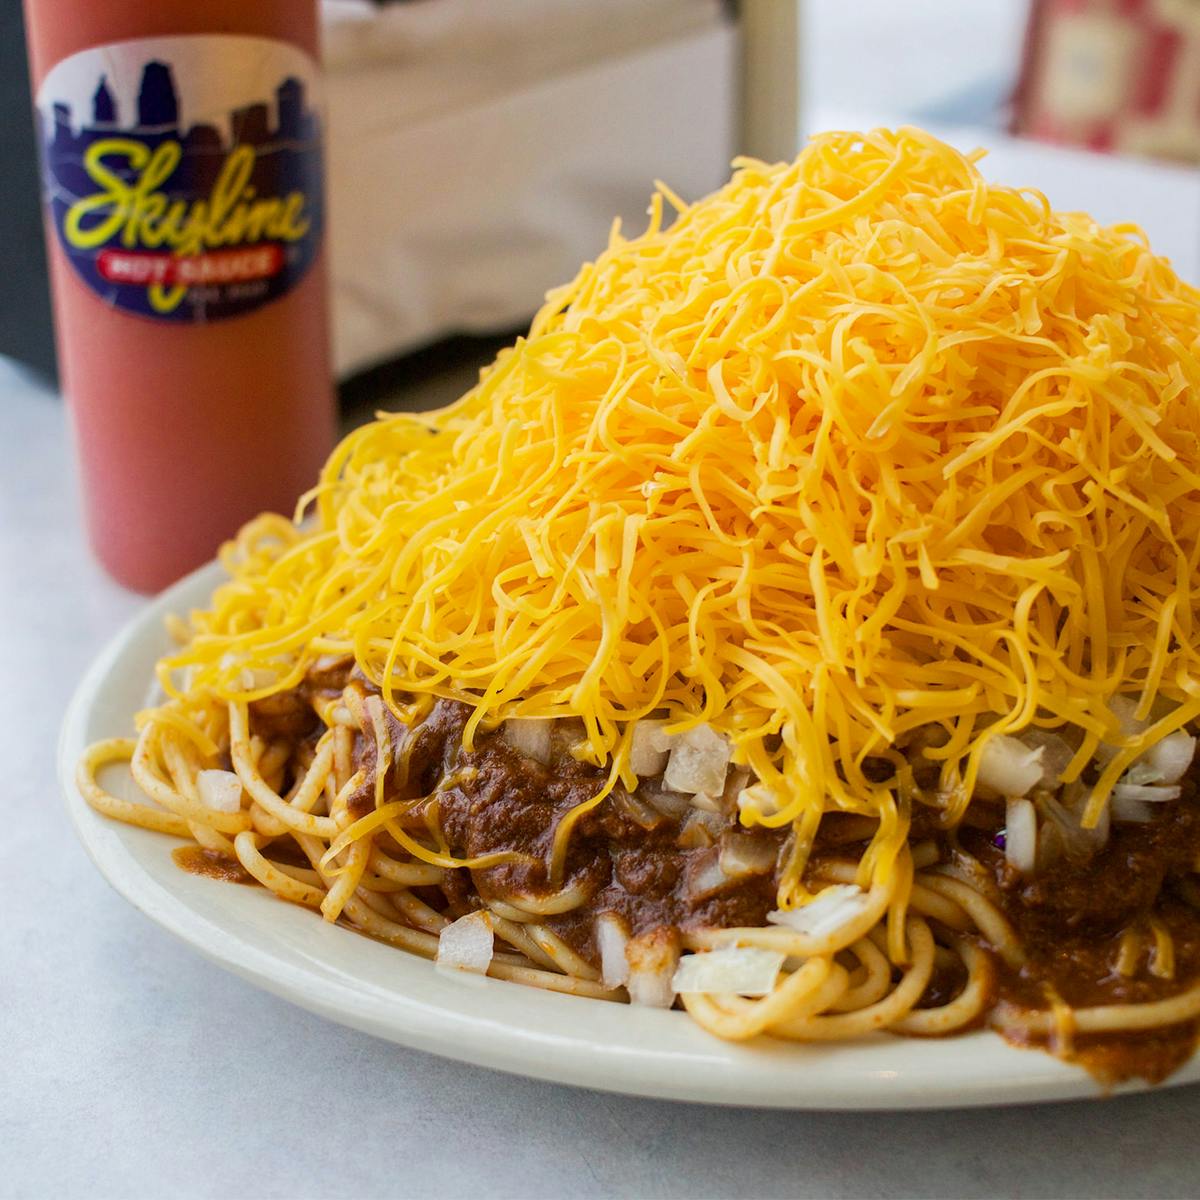 Skyline Chili Near Me - how to cook old chicken